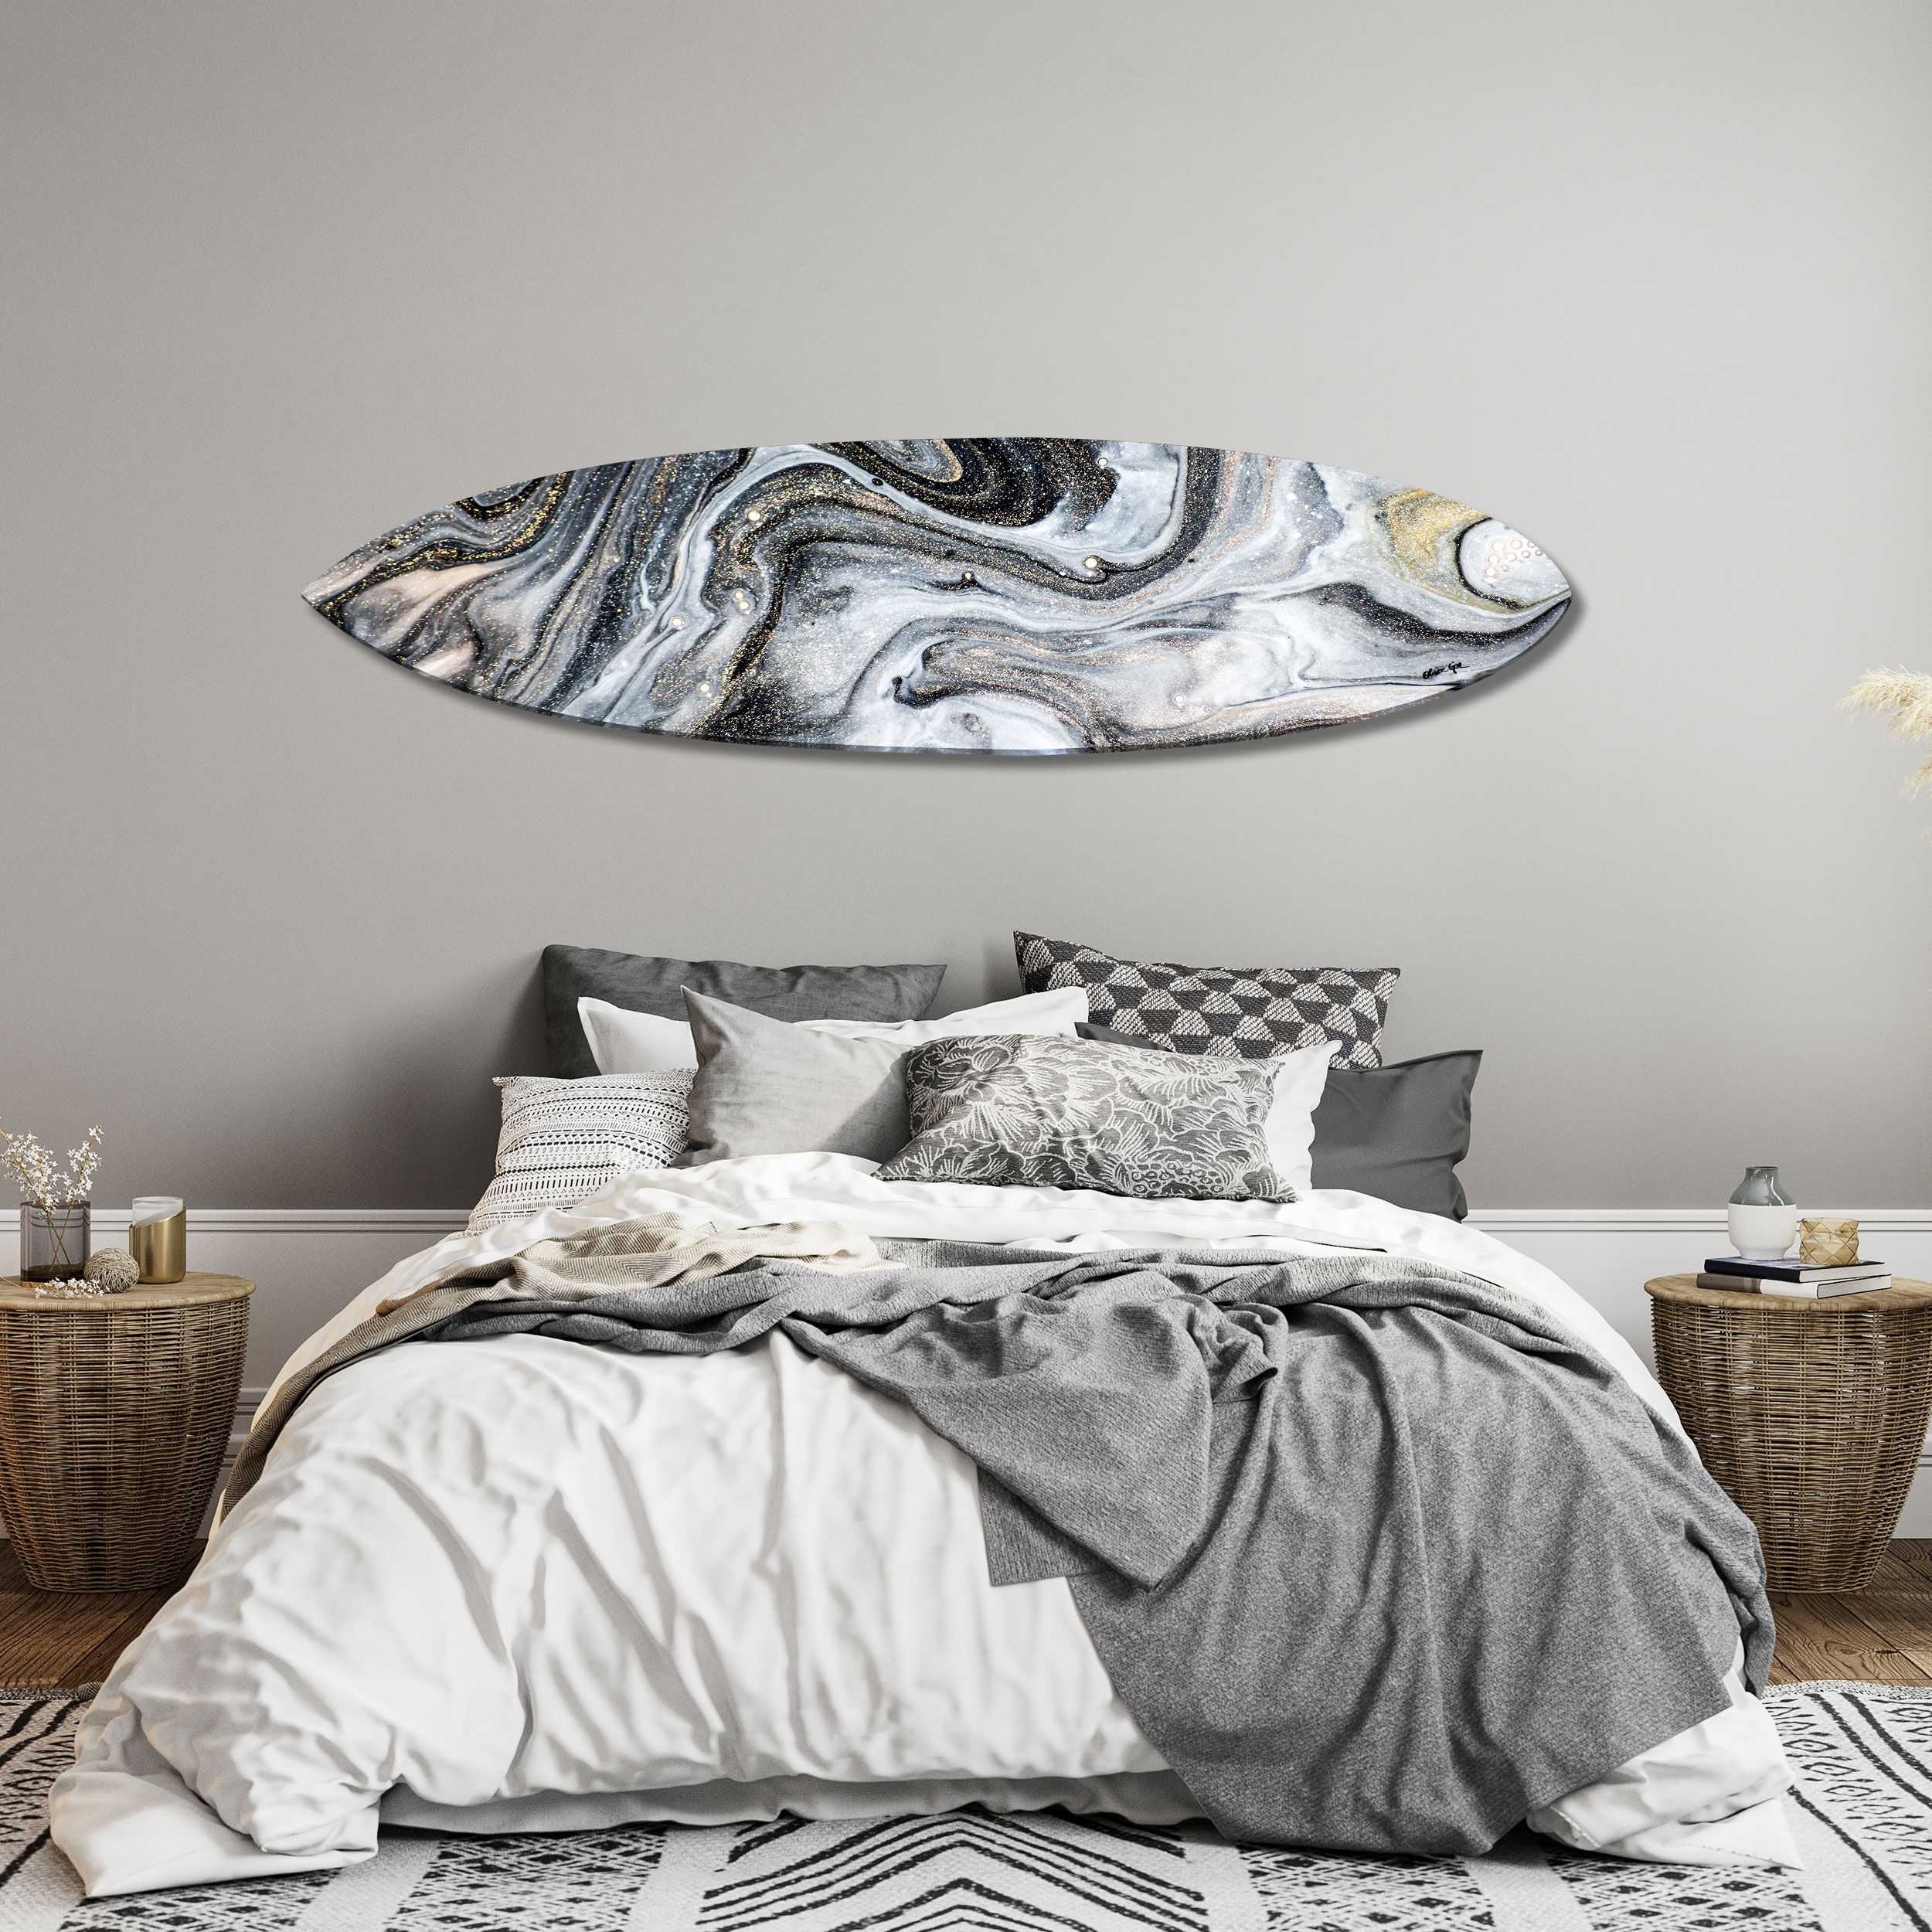 Marbled Gold Surfboard | Wall Art by The Oliver Gal